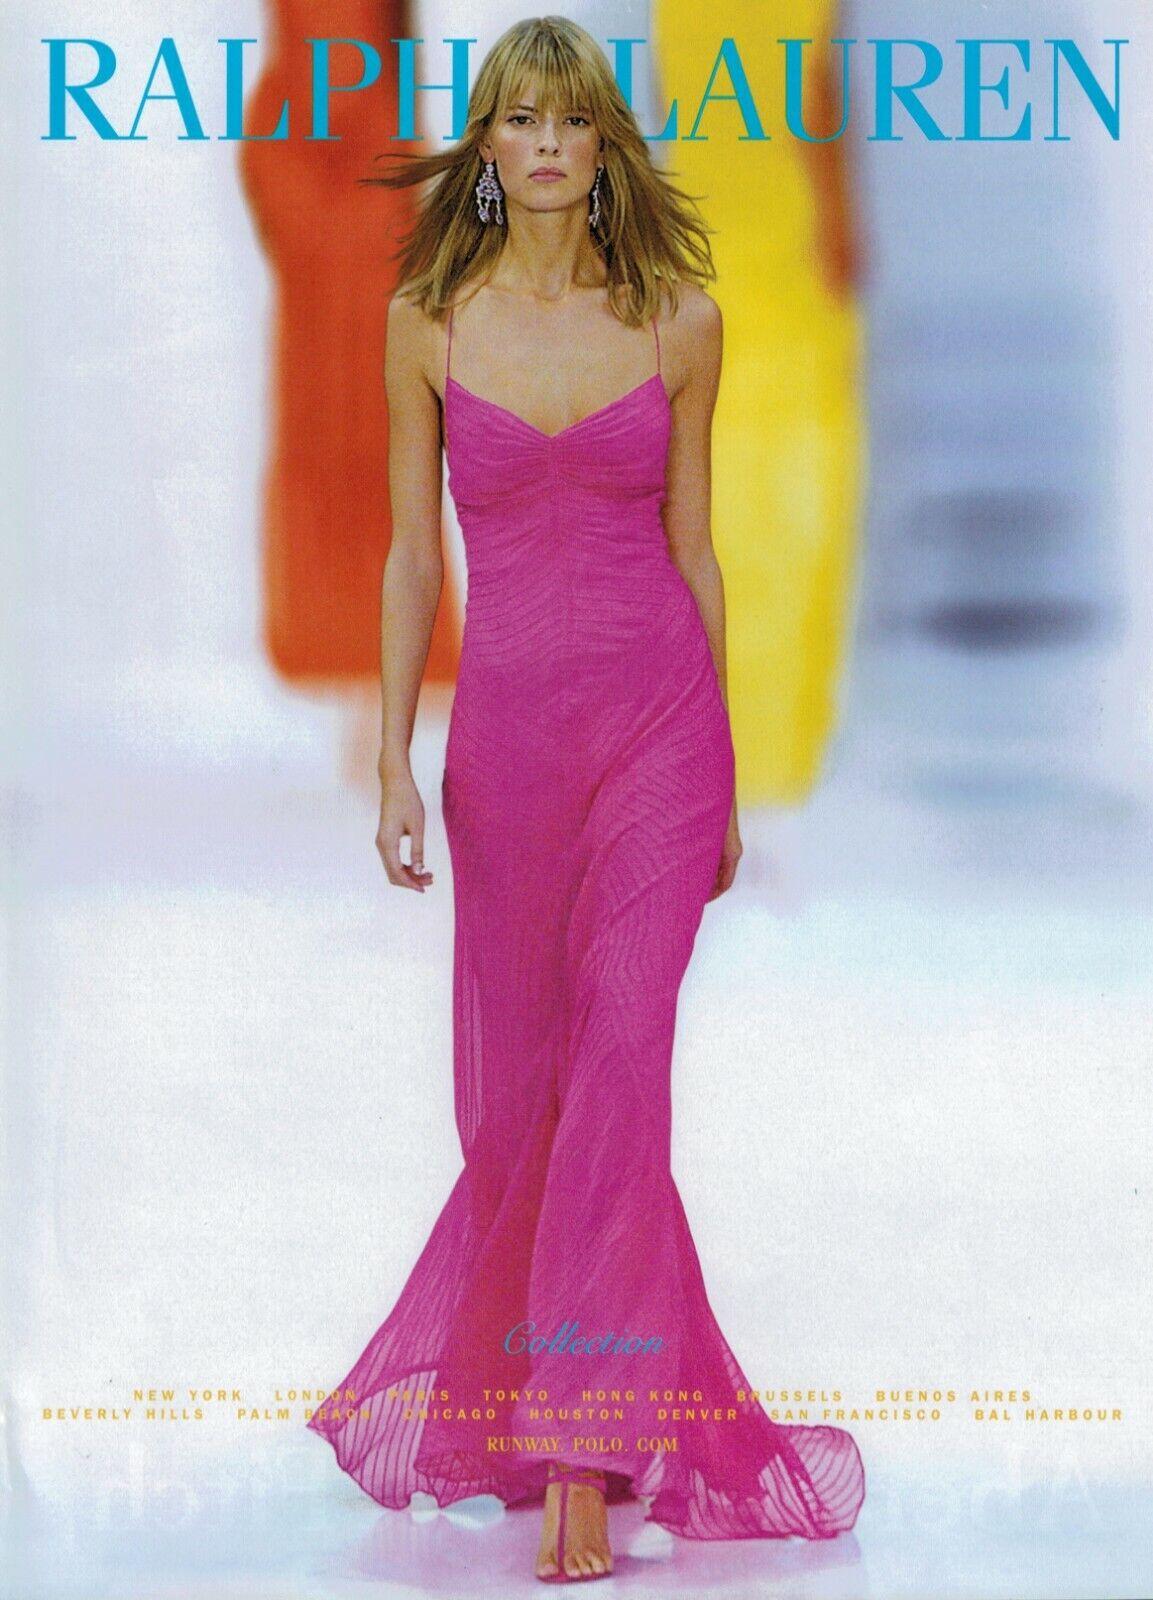 TheRealList presents: a fabulous hot pink Ralph Lauren pleated chiffon gown. From the Spring/Summer 2004 collection, this gown took center stage as look 43, modeled by the enchanting Julia Stegner. This sensational gown, reminiscent of Barbie's